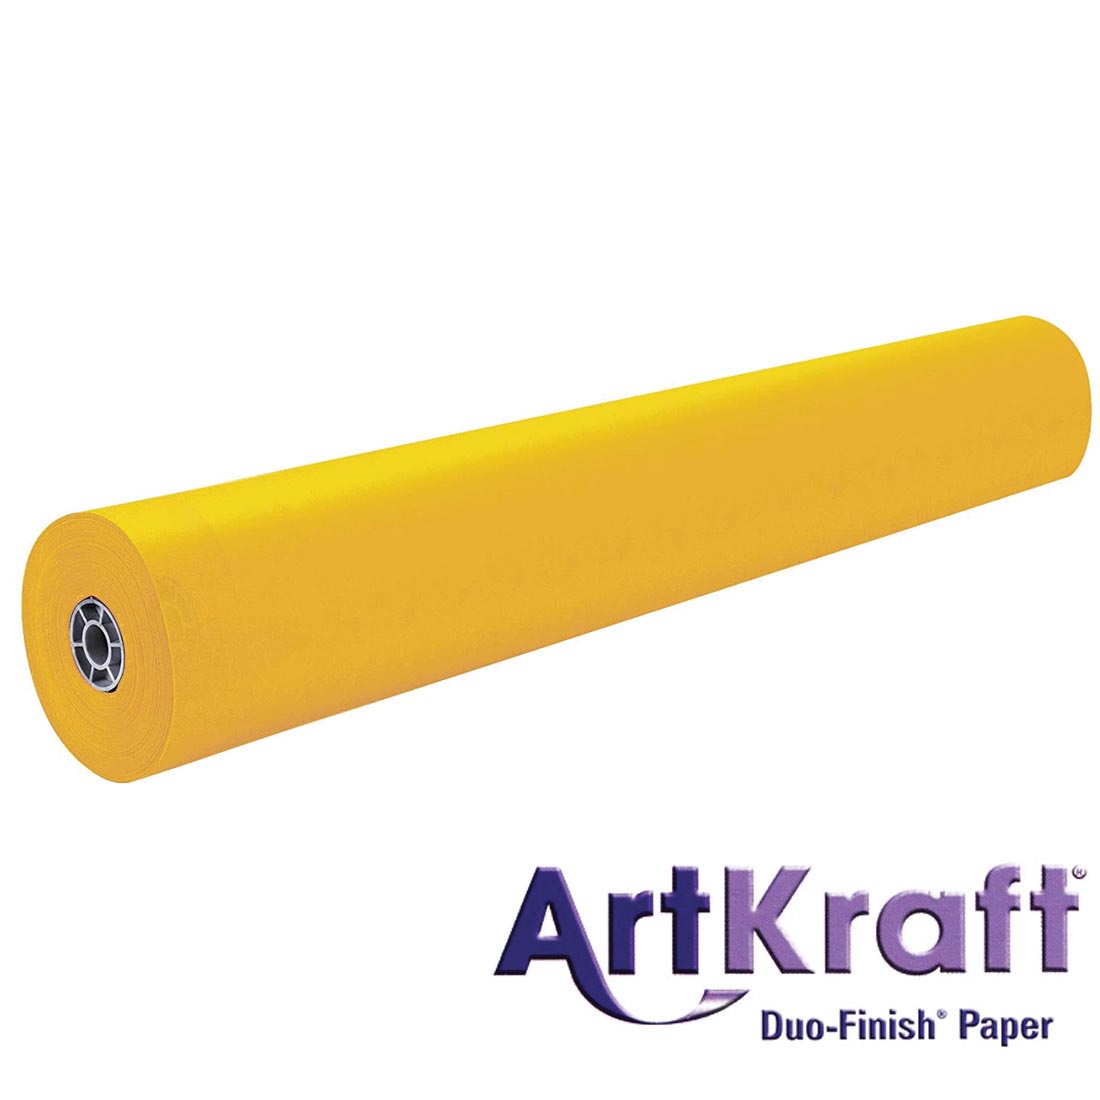 Roll of Autumn Gold Paper with text ArtKraft Duo-Finish Paper